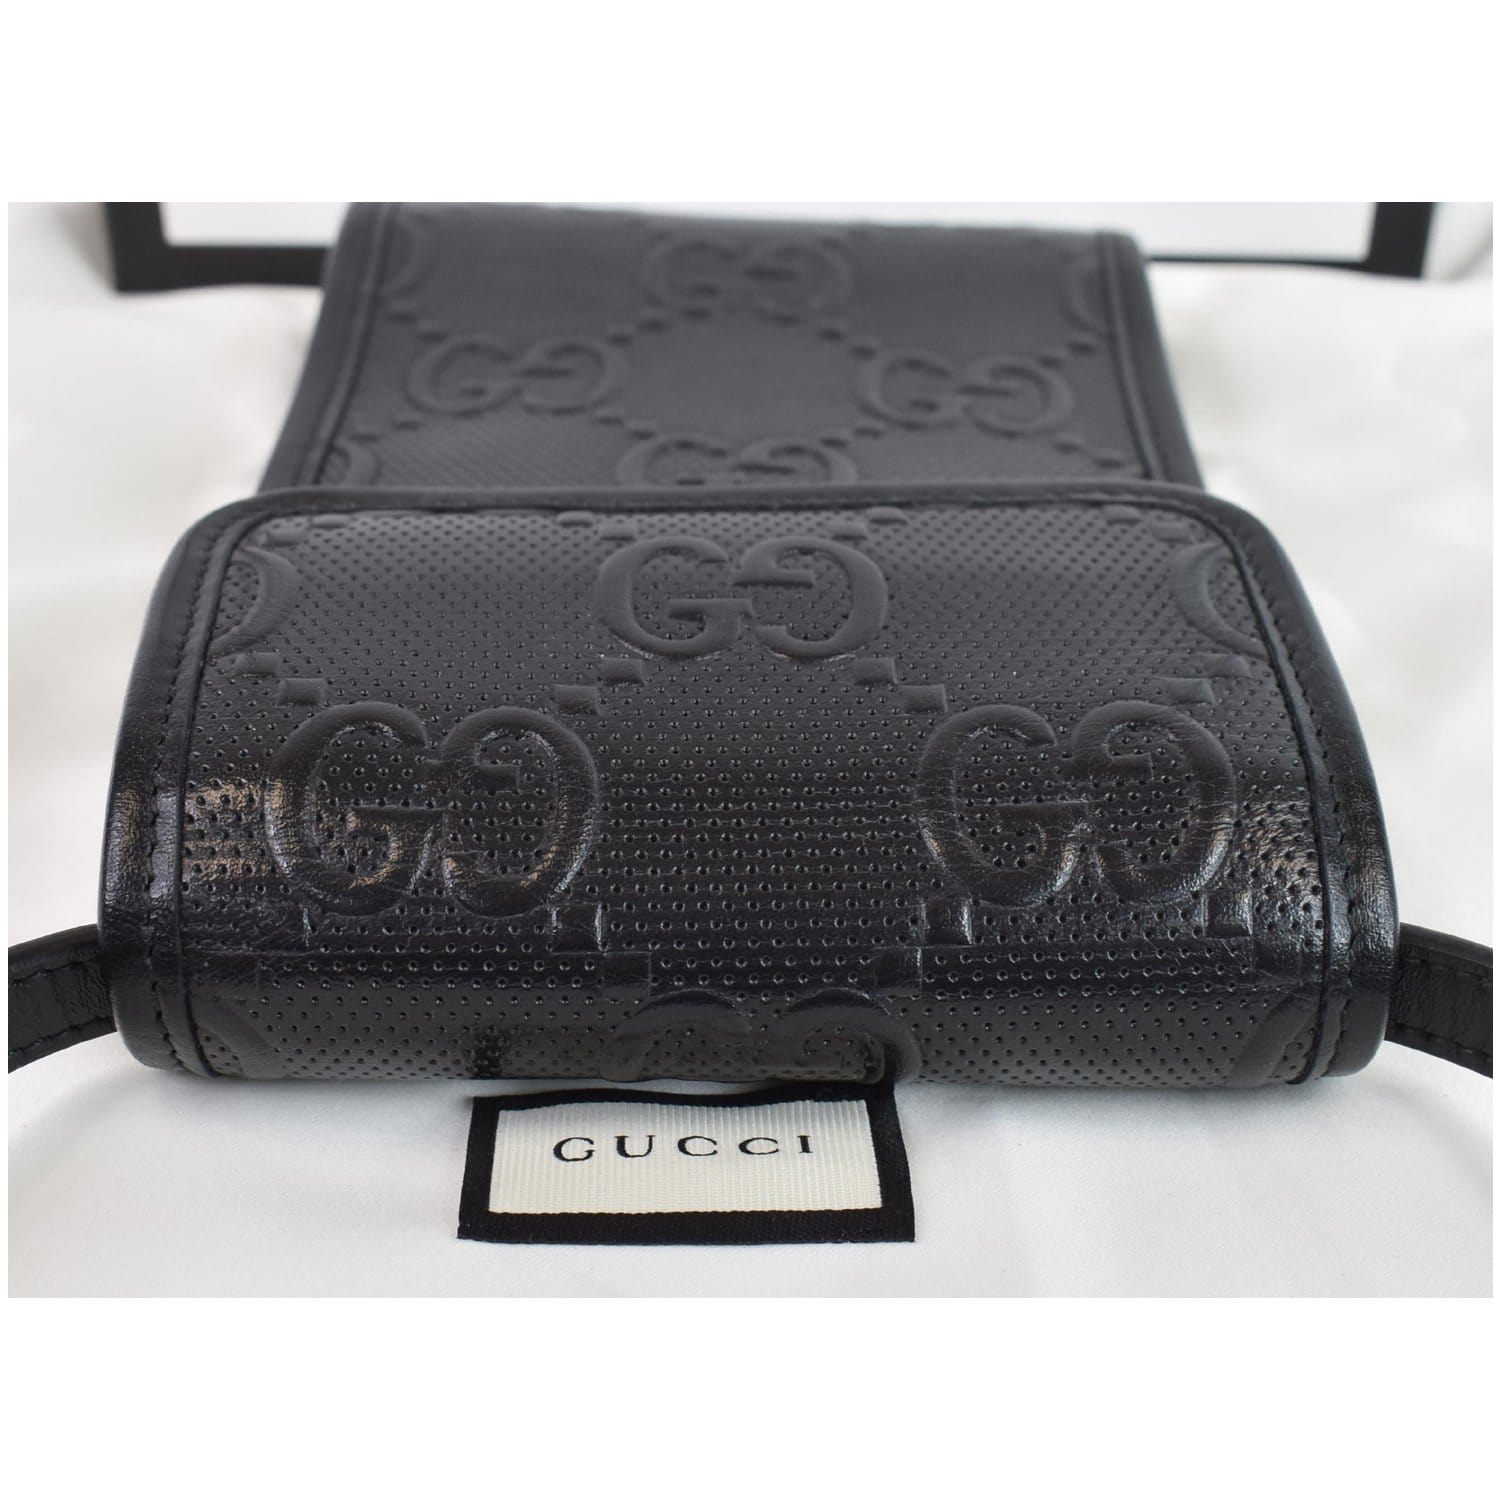 Gucci, Bags, Authentic Gucci Embossed Messenger Bag